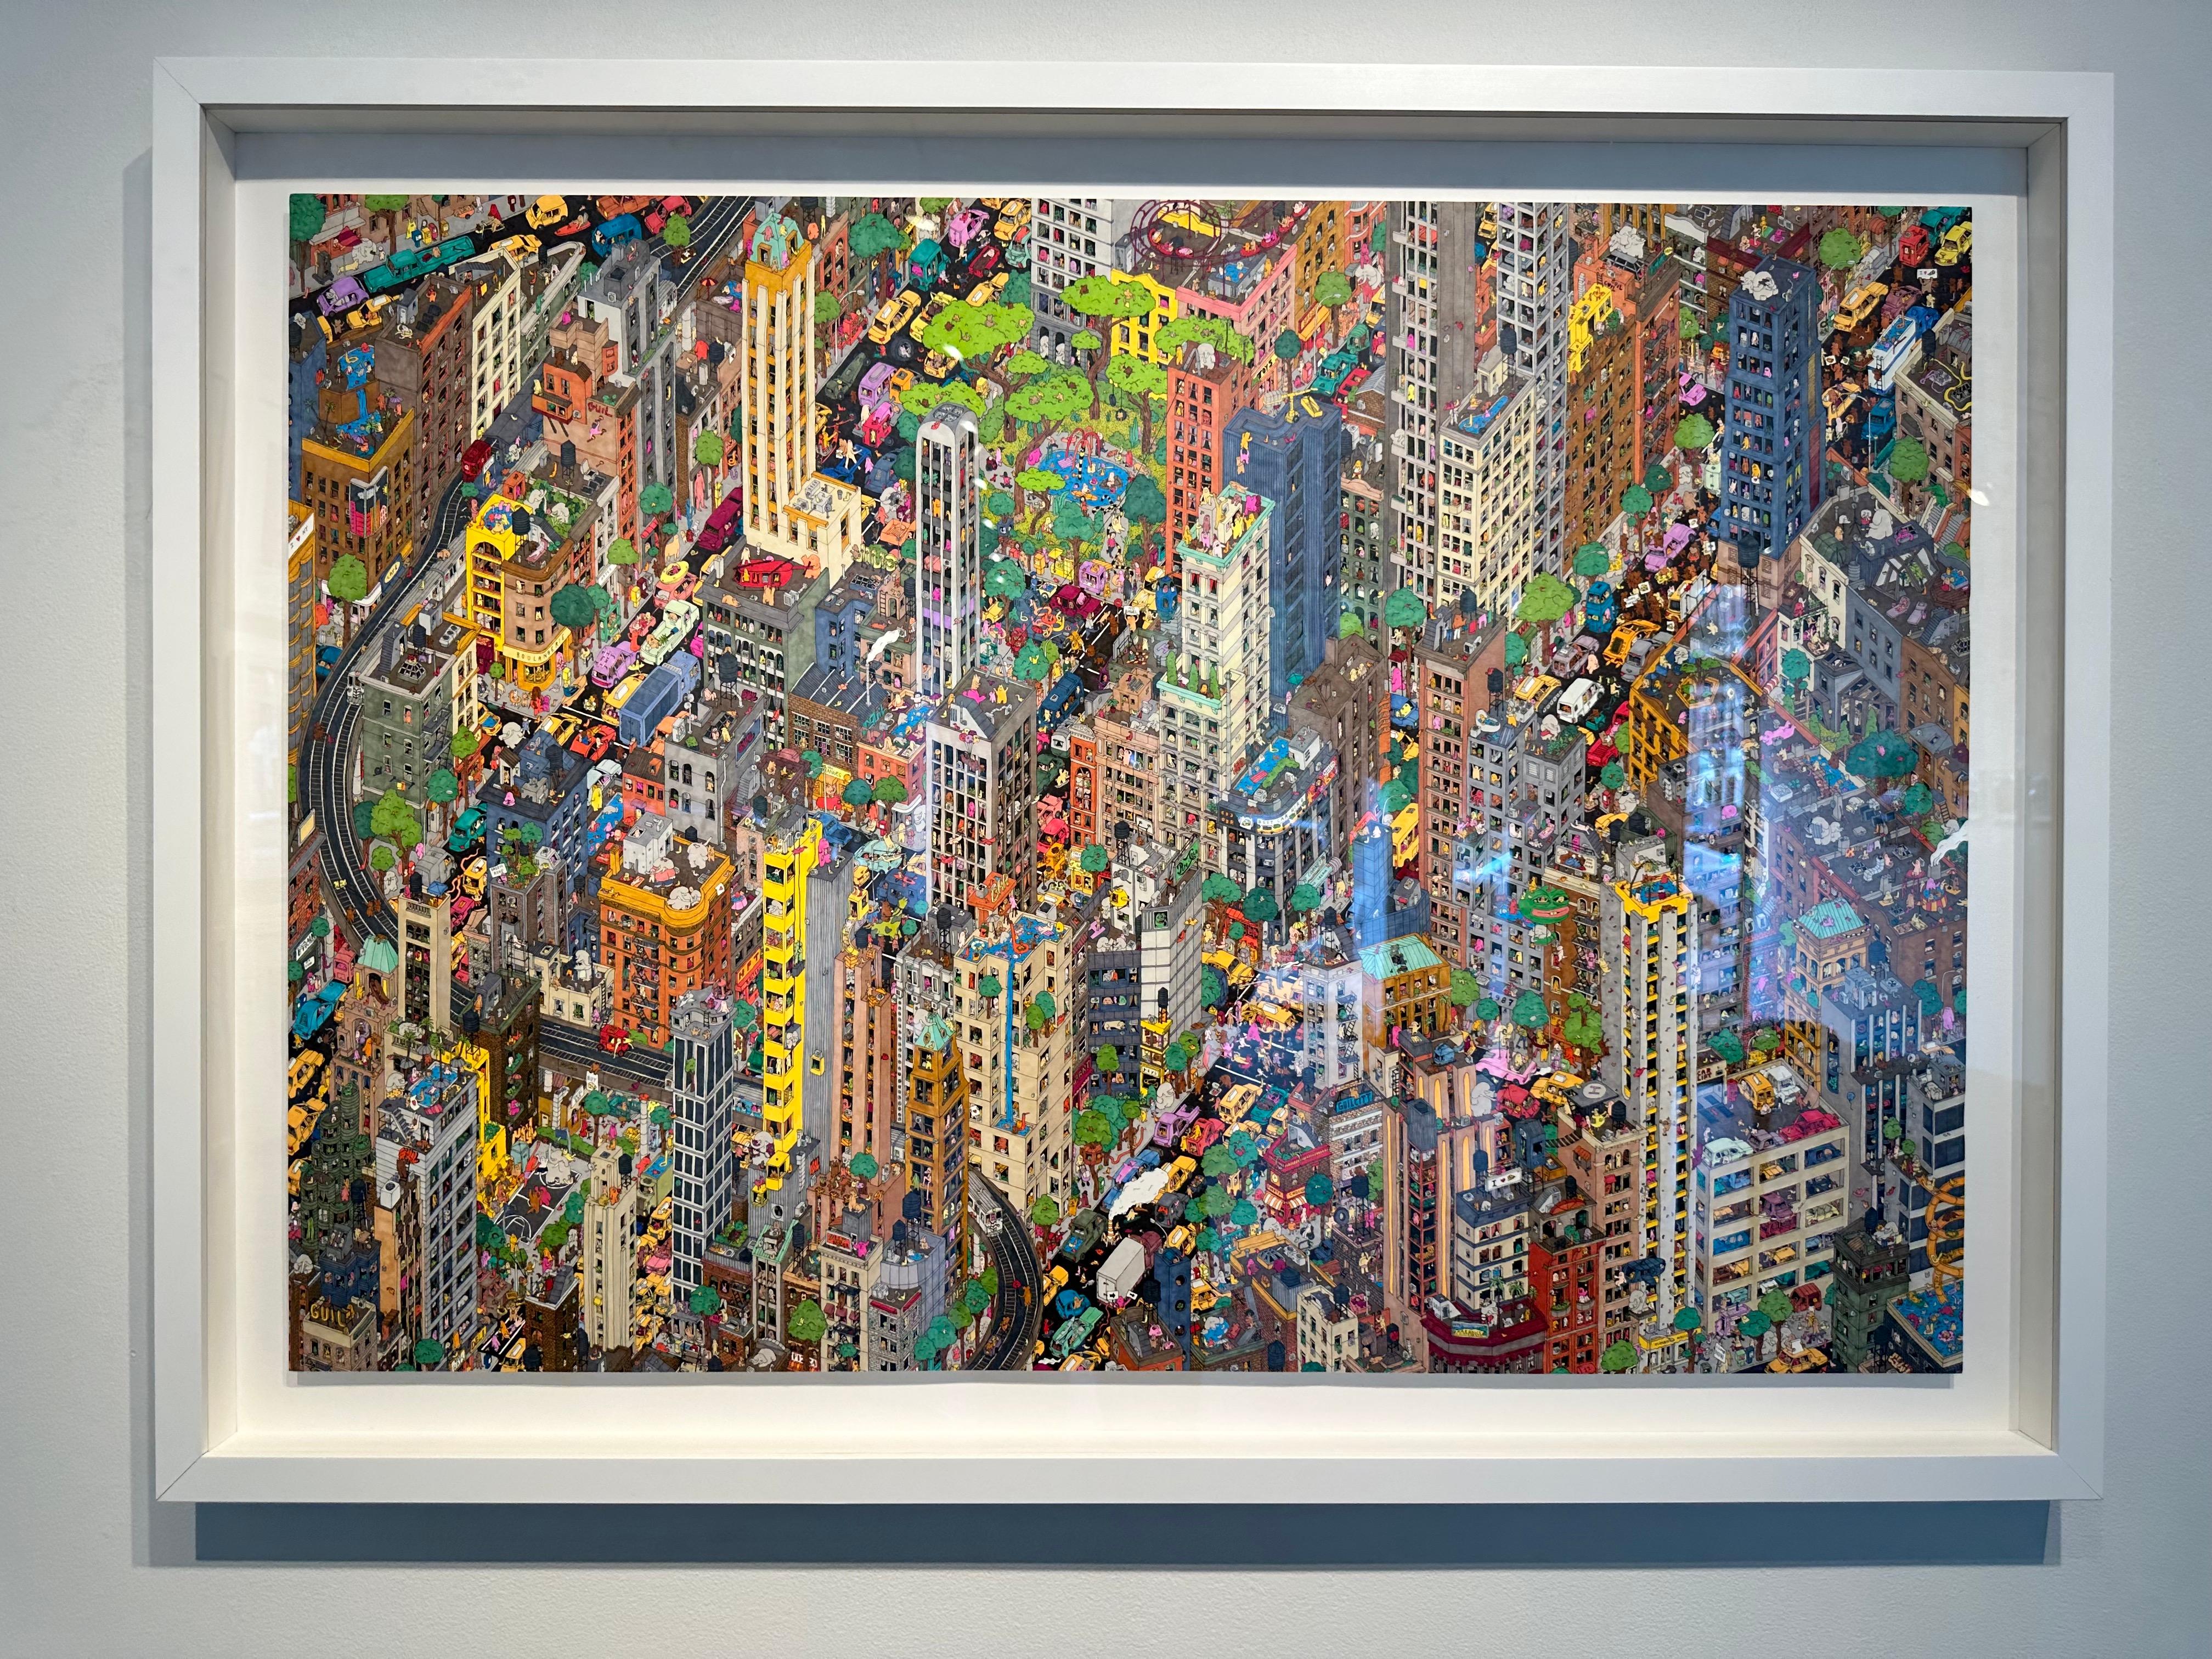 Neighborhoods - intricate hand-drawn colorful illustration of urban New York - Art by Guillaume Cornet